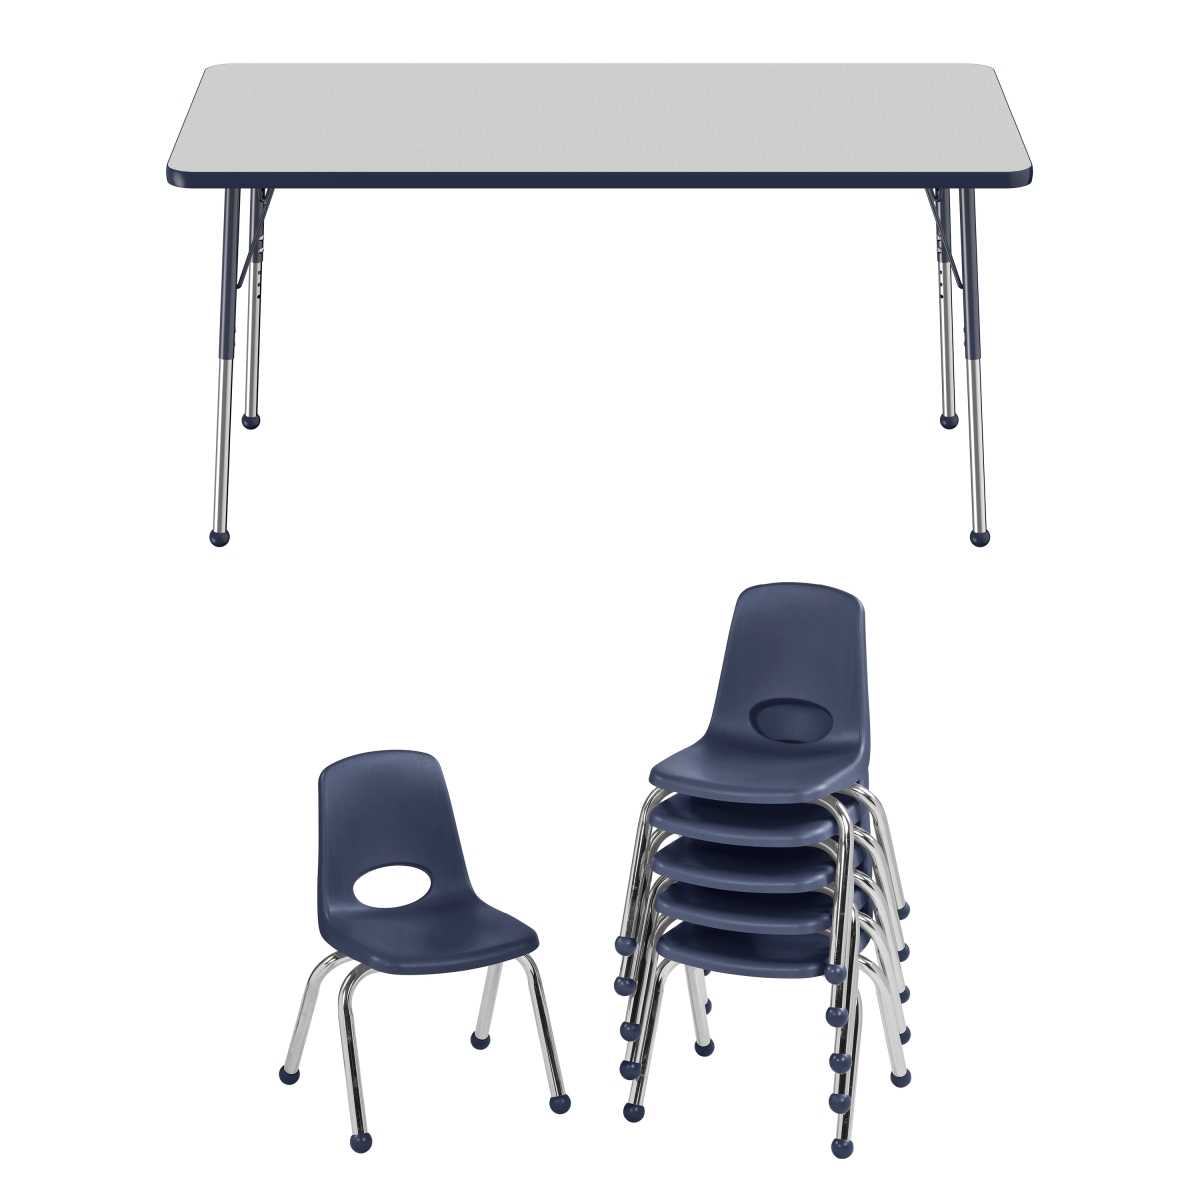 10299-gynv 30 X 60 In. Rectangle T-mold Adjustable Activity Table Standard Ball With 6 Stack Chairs 12 In. Ball Glide - Grey & Navy